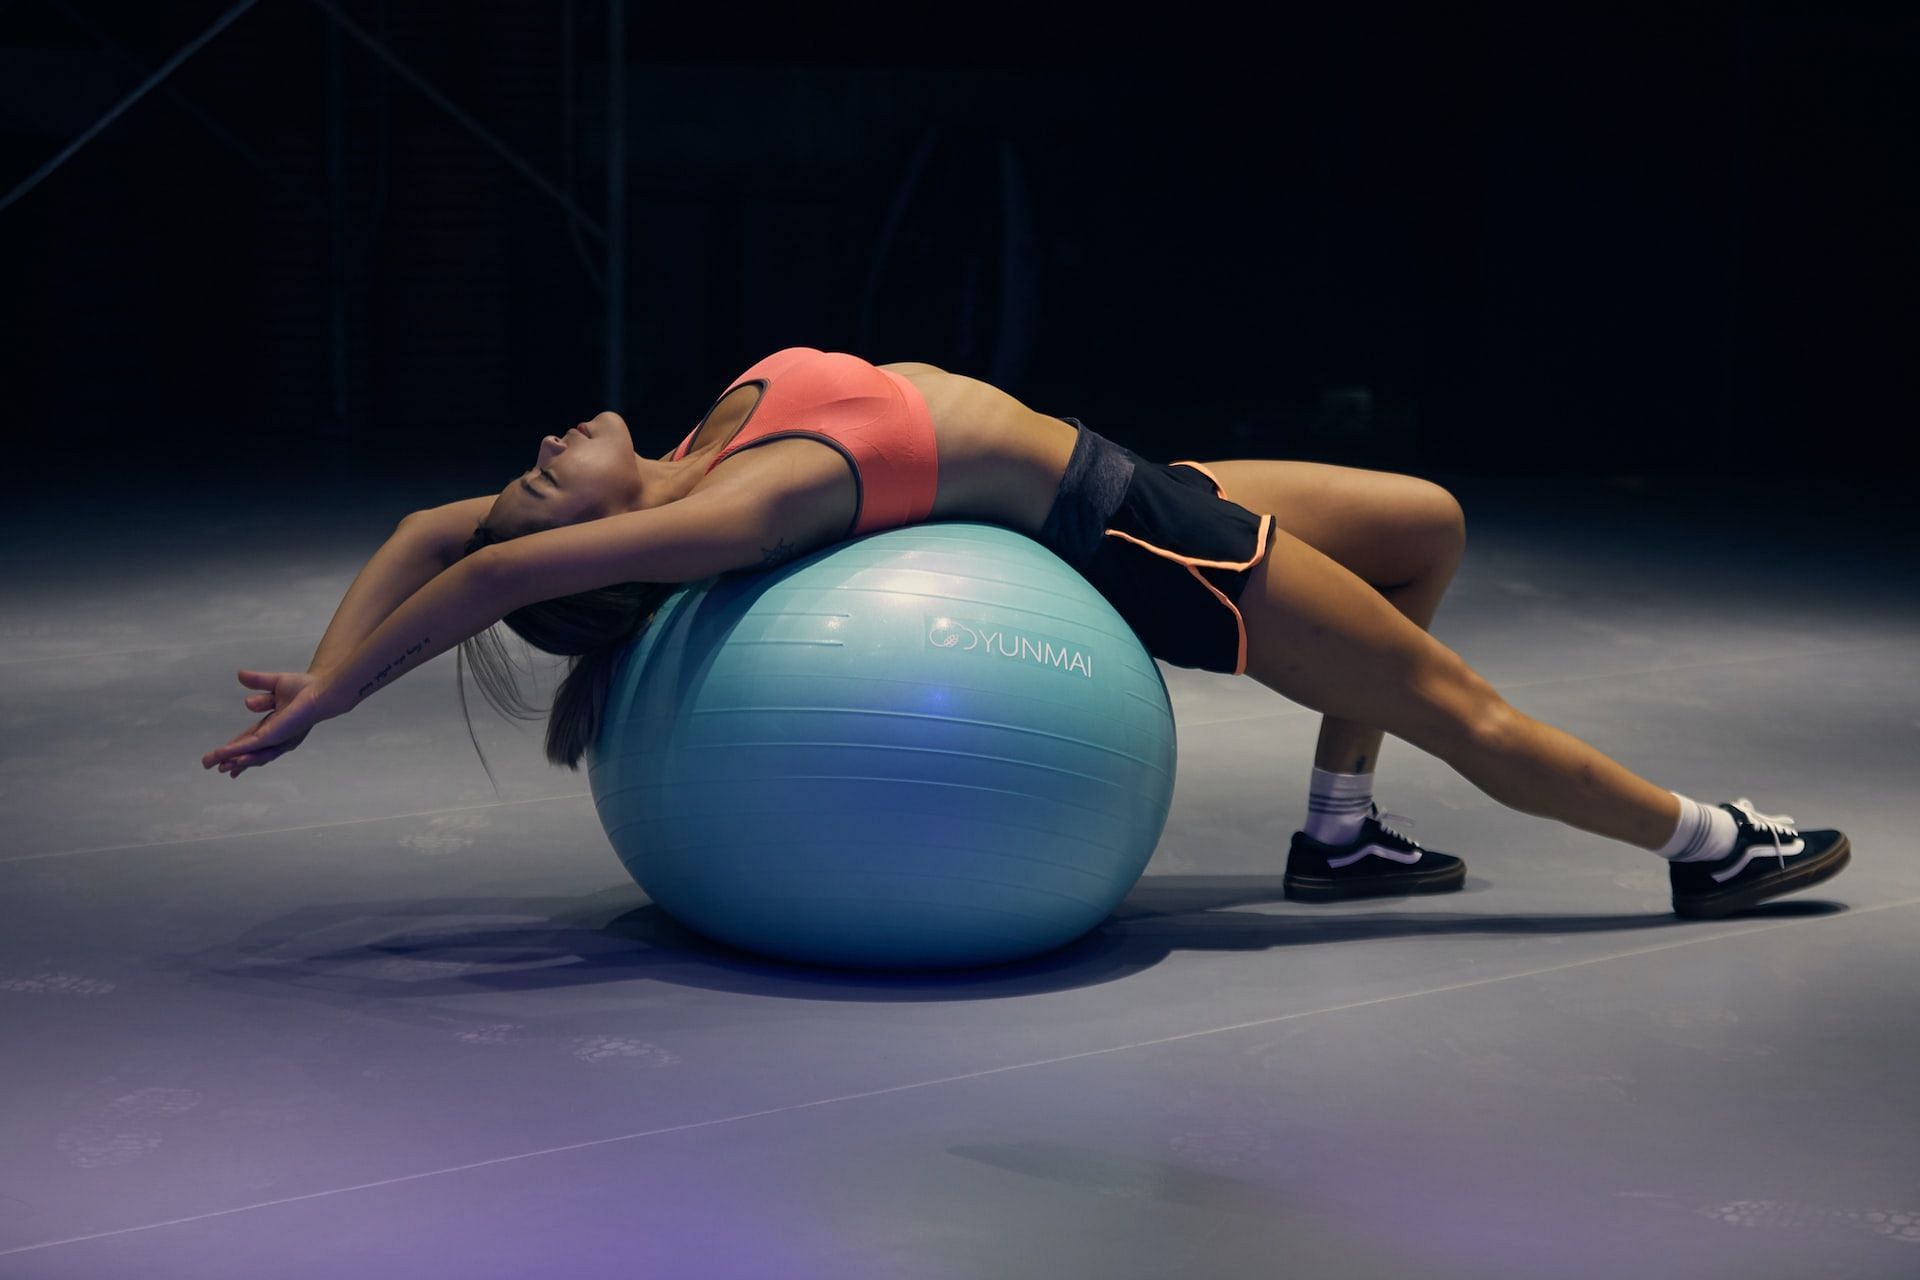 An exercise ball helps strengthen the entire core muscles. (Photo via Unsplash/mr lee)